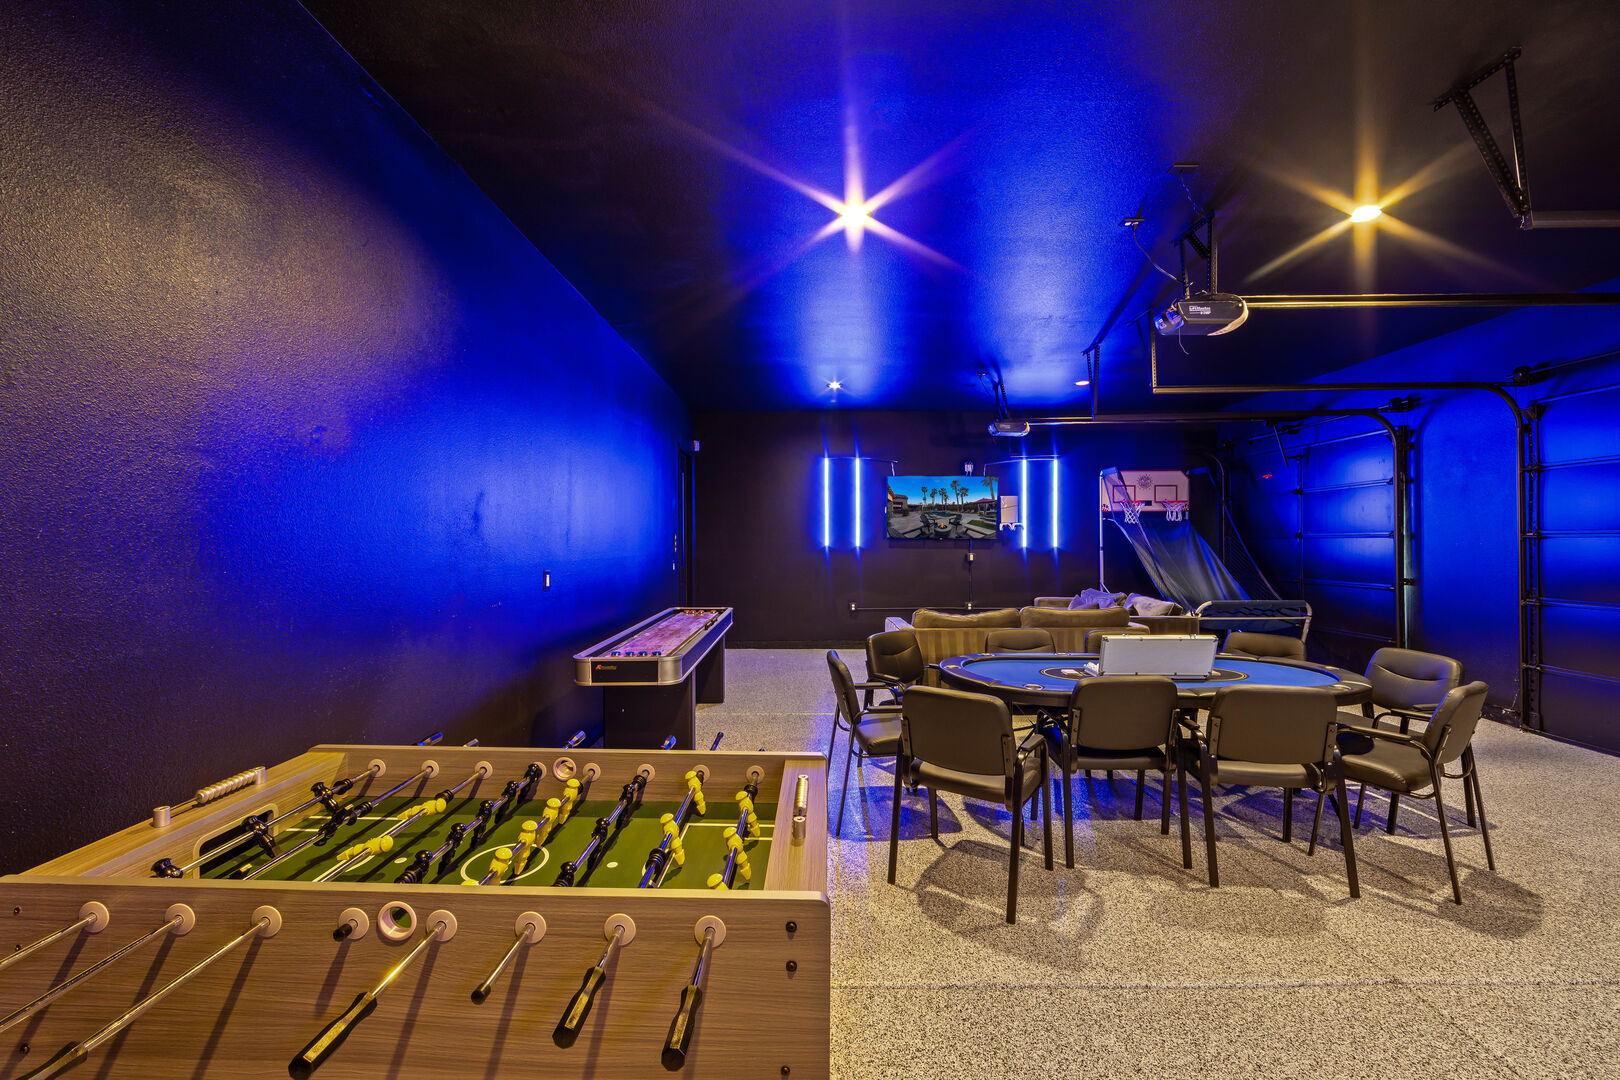 Score big and challenge your friends to a match on our foosball table in the game room.